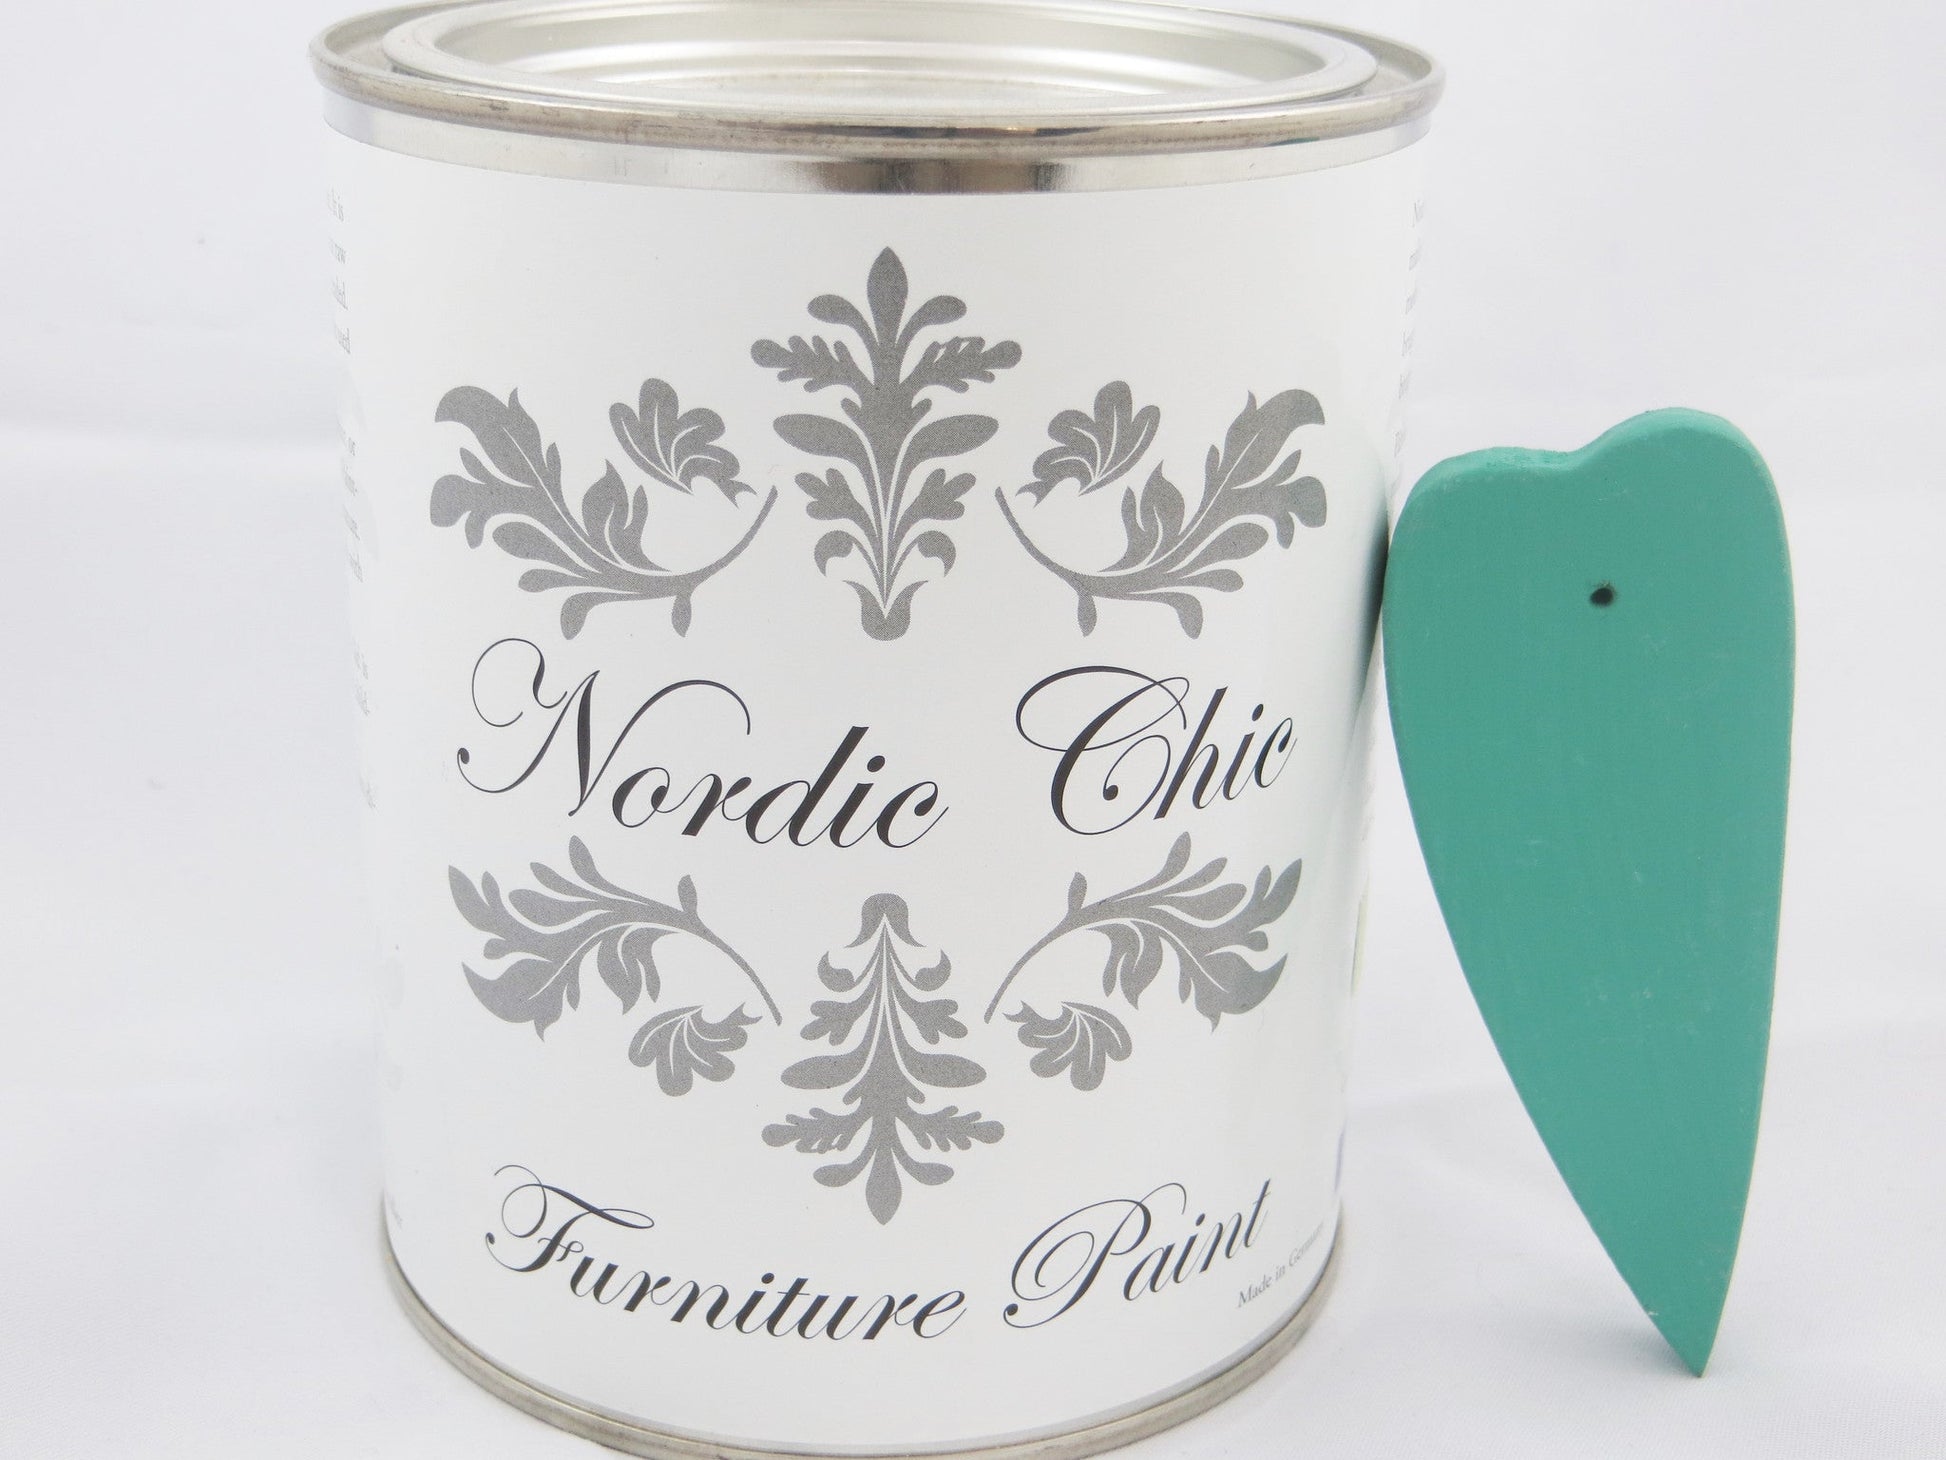 Nordic Chic® Furniture Paint - Forrest - Nordic Chic®